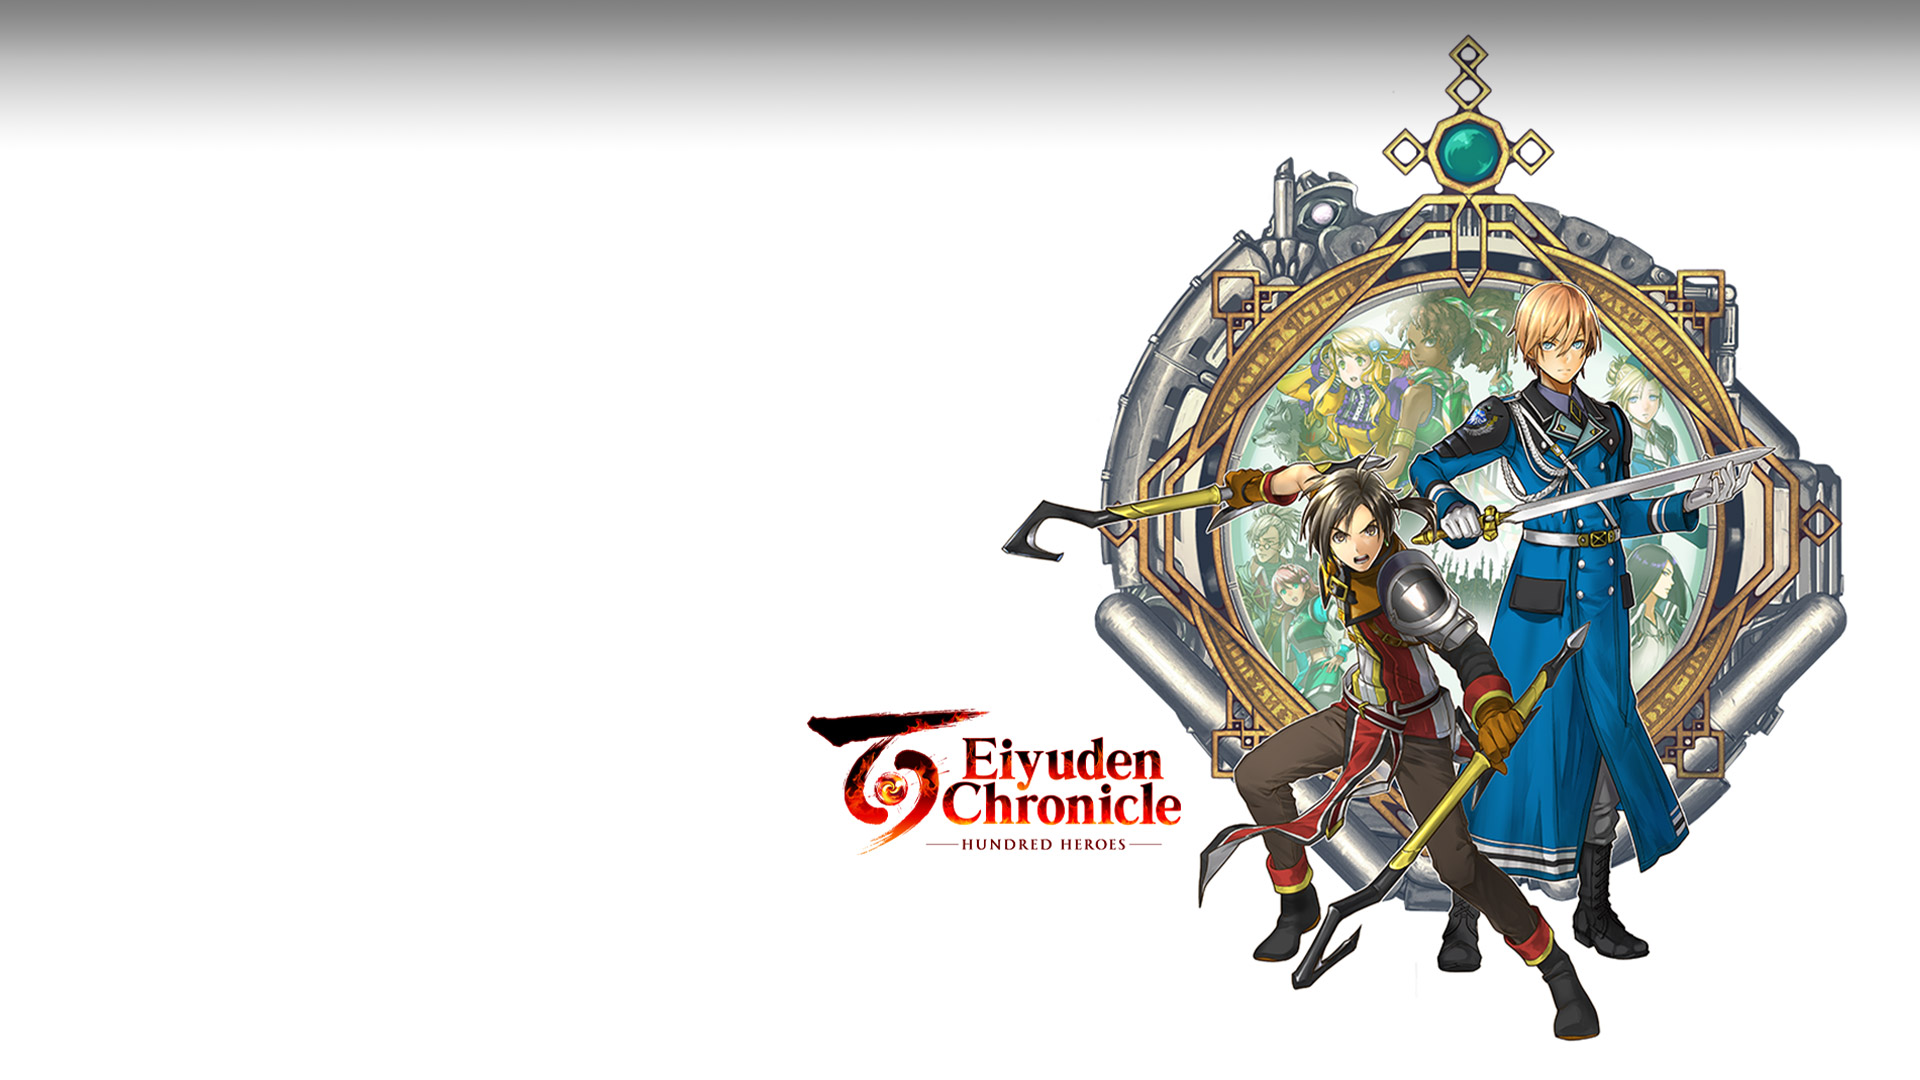 Eiyuden Chronicle: Hundred Heroes. Two characters with weapons standing in front of an amulet like background with other characters in the center.